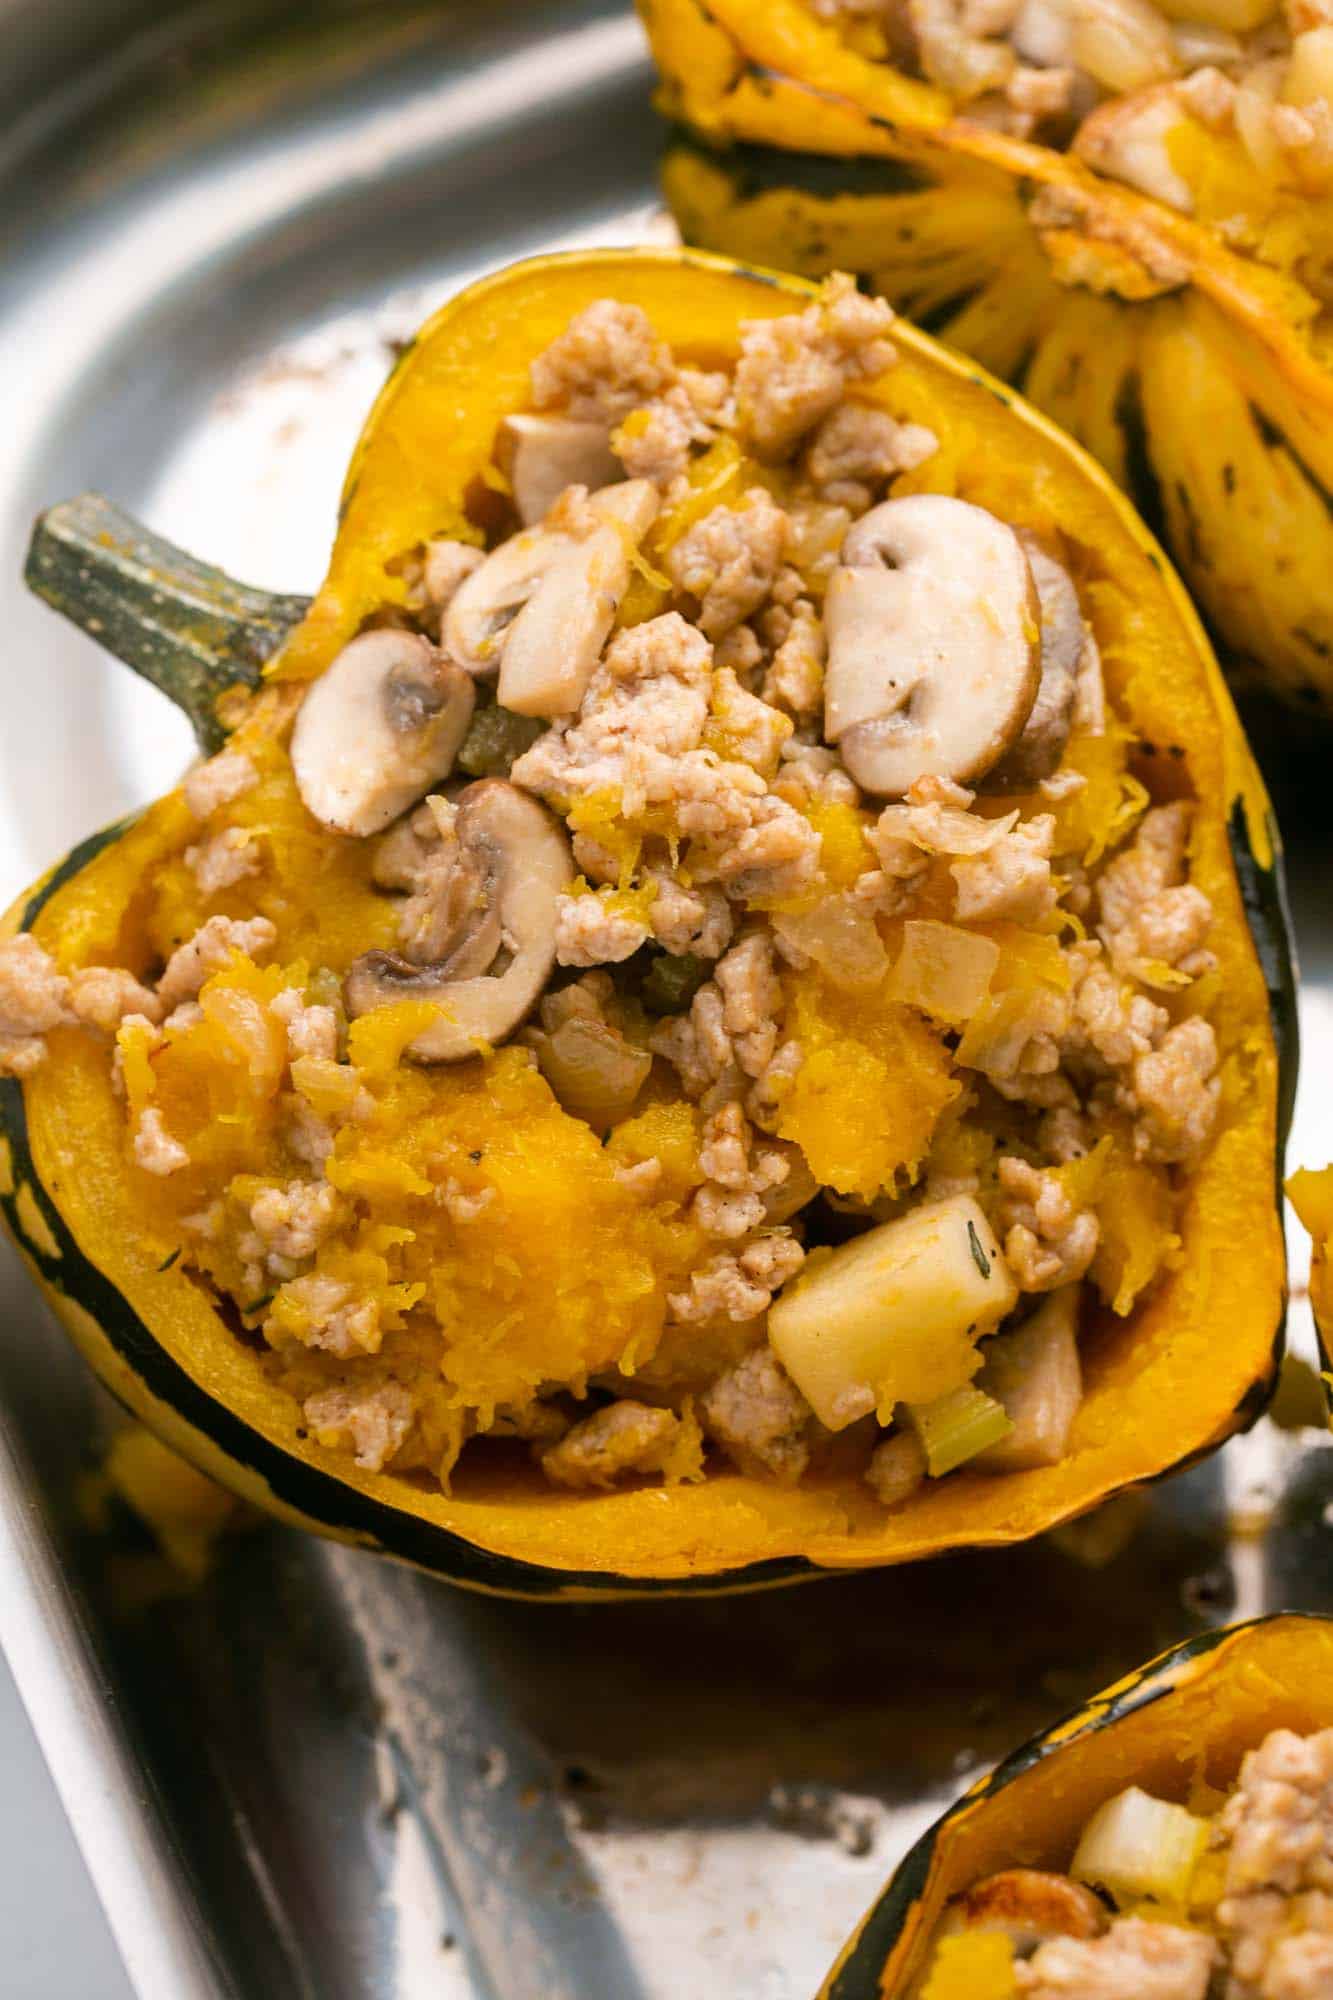 Stuffed acorn squash with ground chicken, apple, and mushrooms